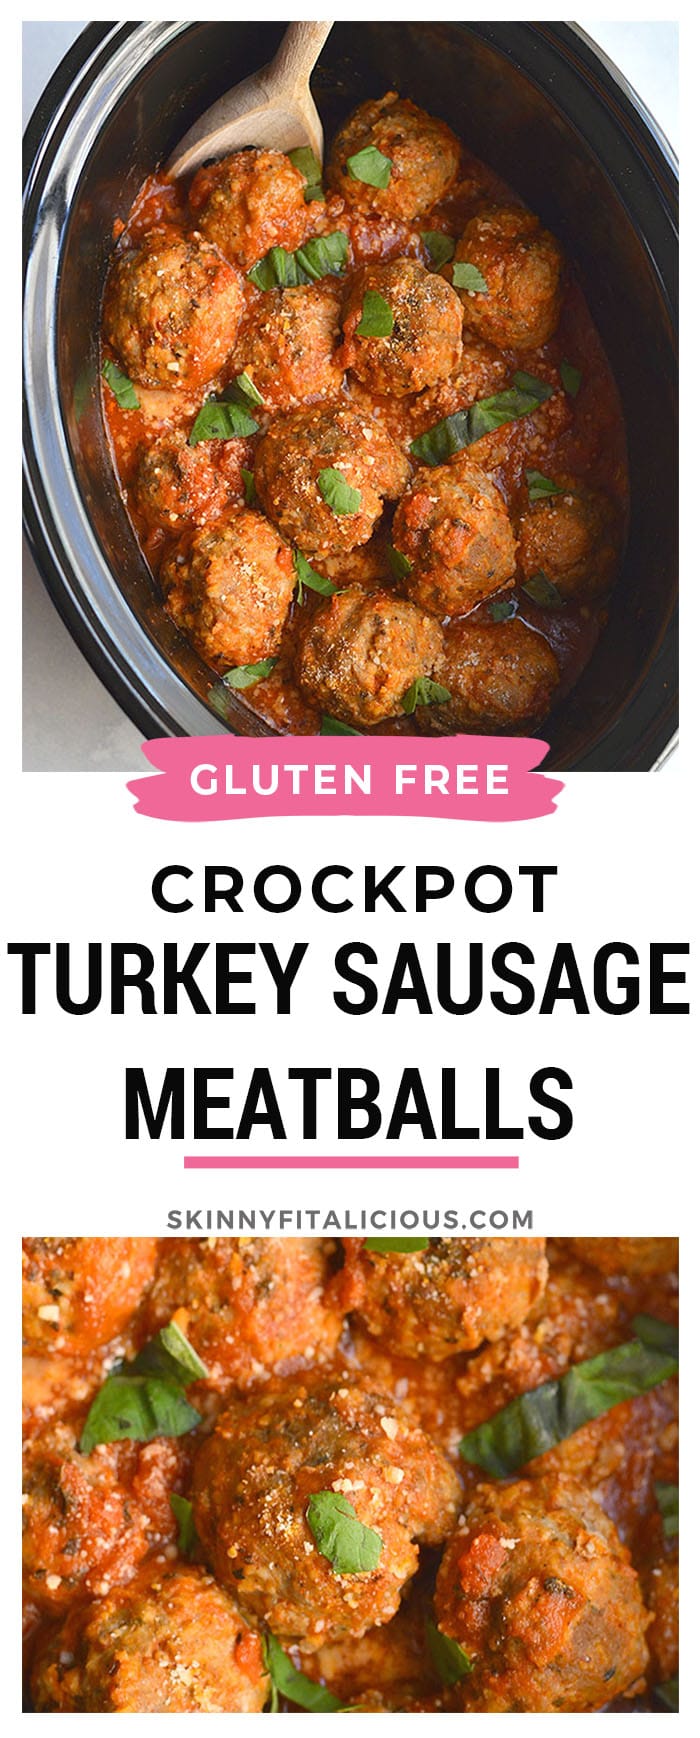 Crockpot Turkey Sausage Meatballs! Thick, juicy, tender meatballs are made with turkey and sausage in a slow cooker. An easy dinner that pleases a crowd! Gluten Free + Low Calorie